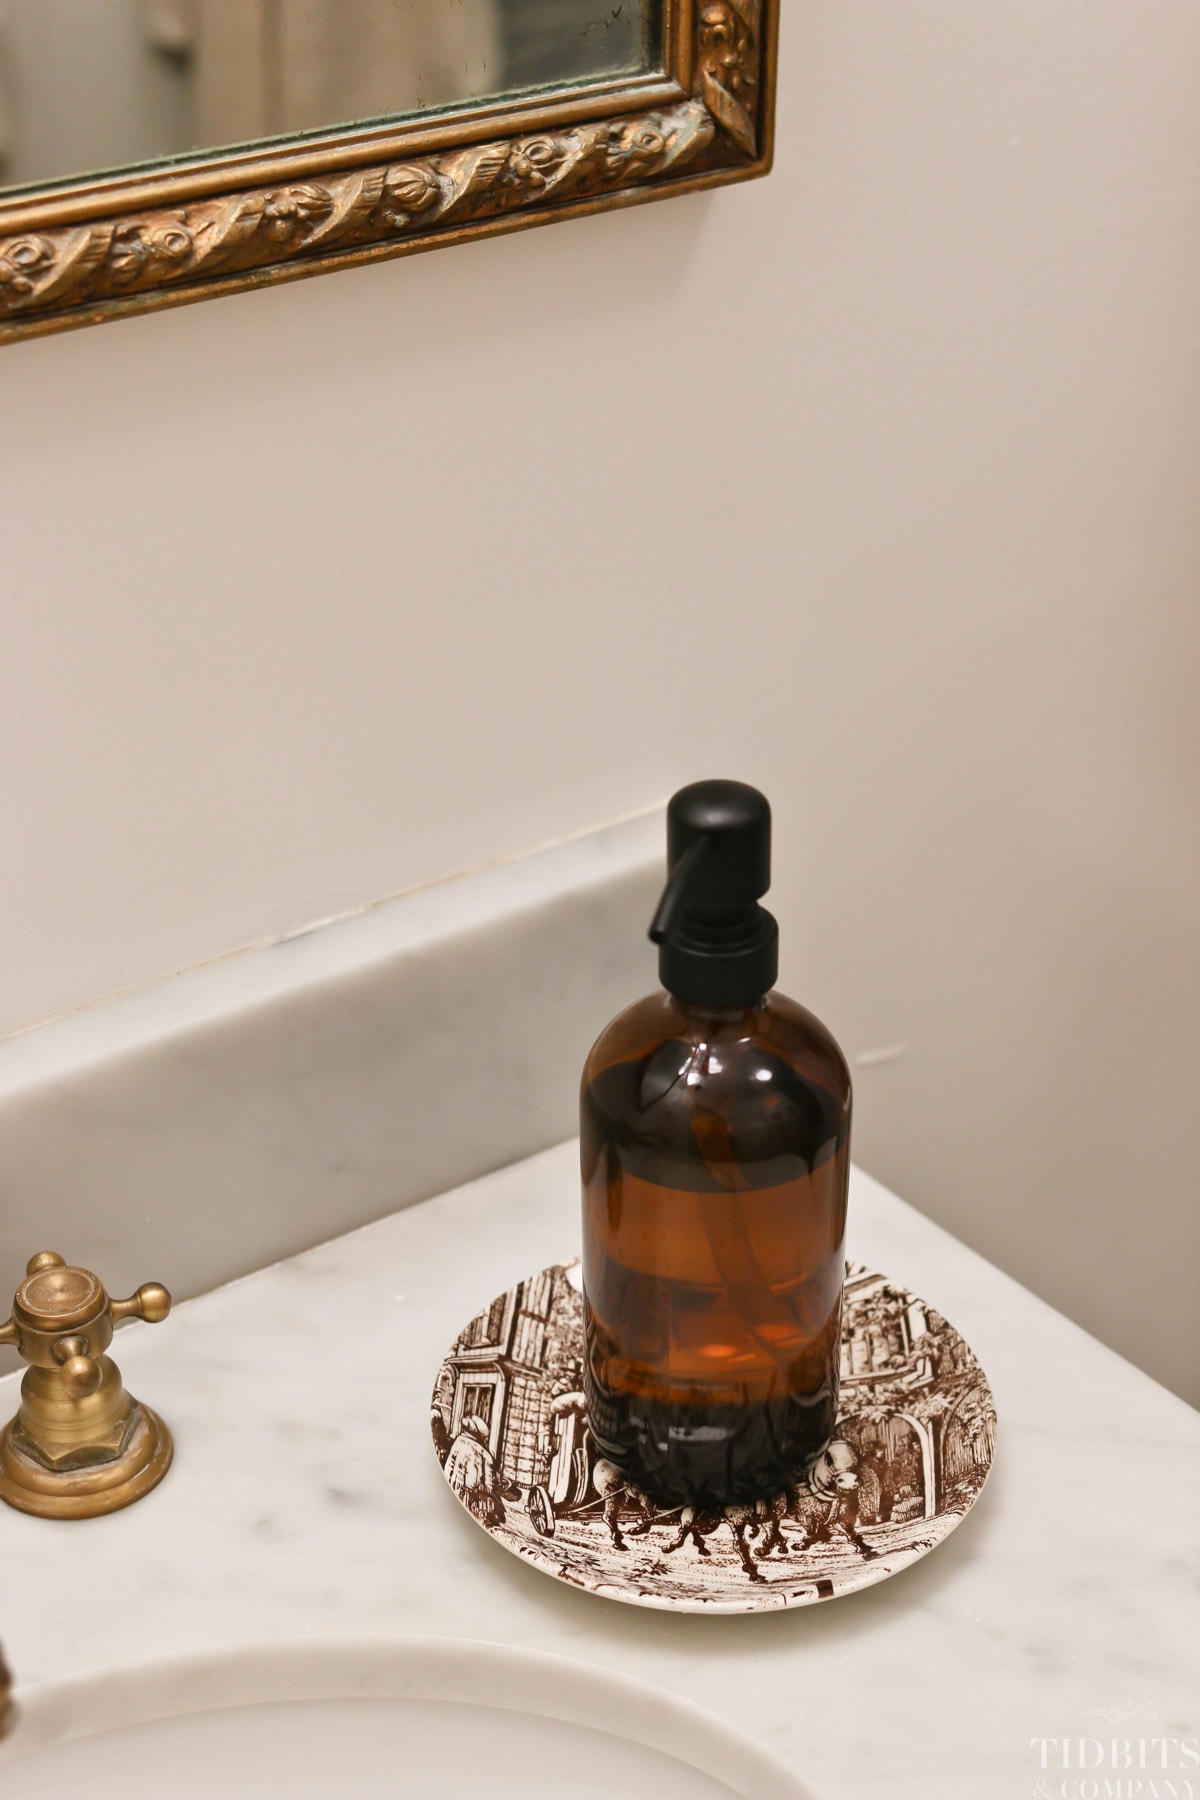 An amber glass bottle on a decorative plate